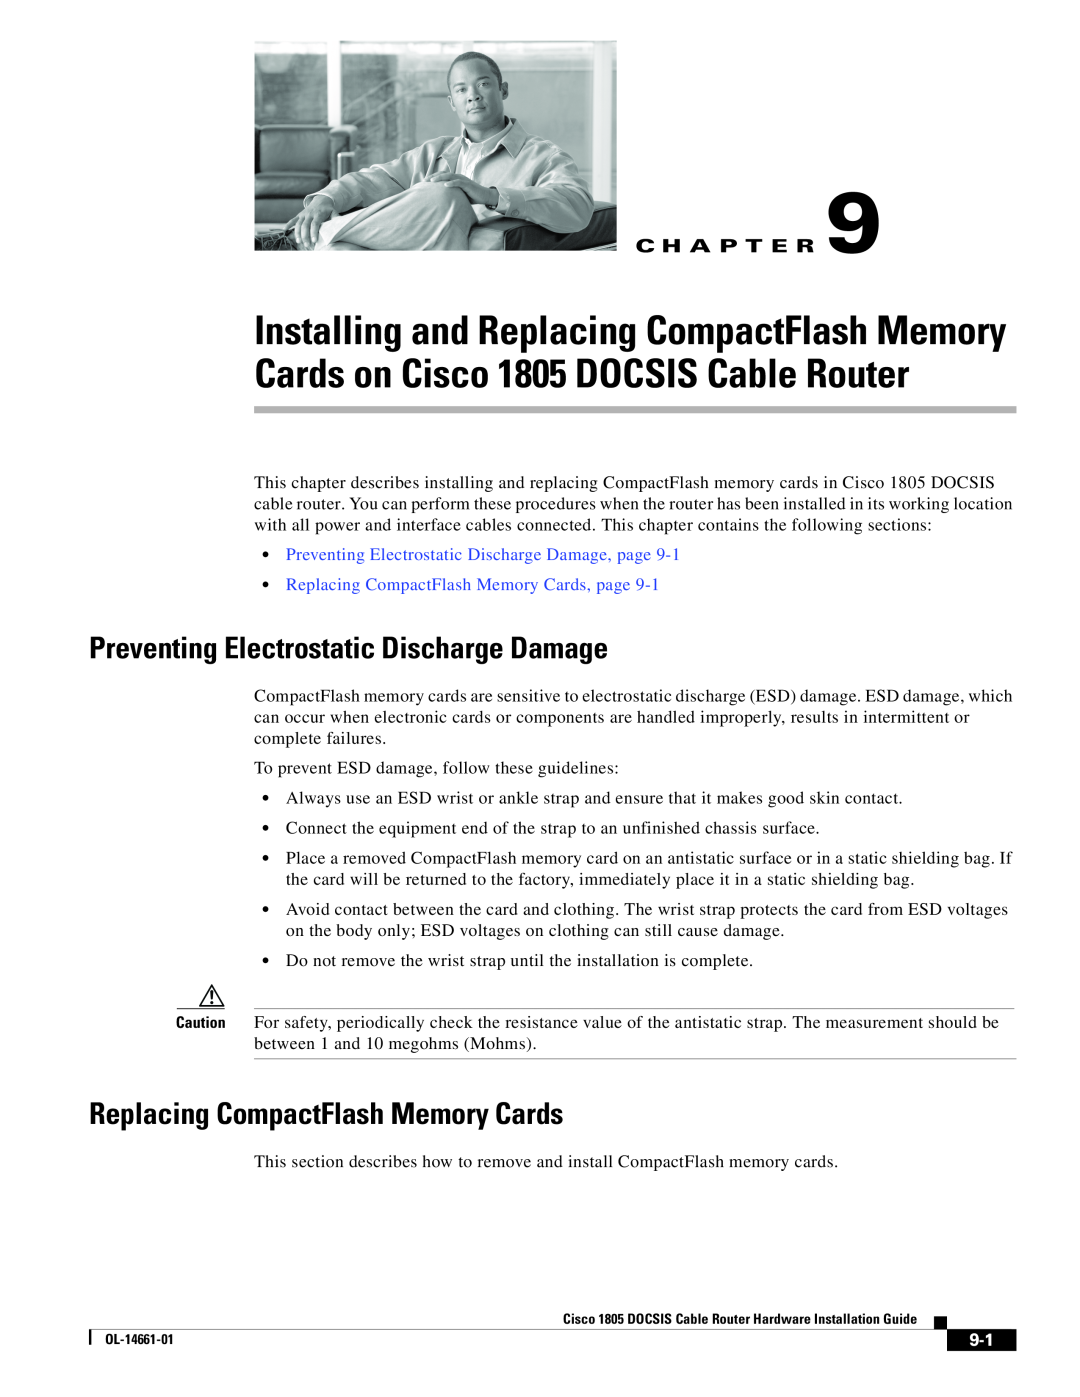 Cisco Systems 1805 DOCSIS manual Preventing Electrostatic Discharge Damage, Replacing CompactFlash Memory Cards 